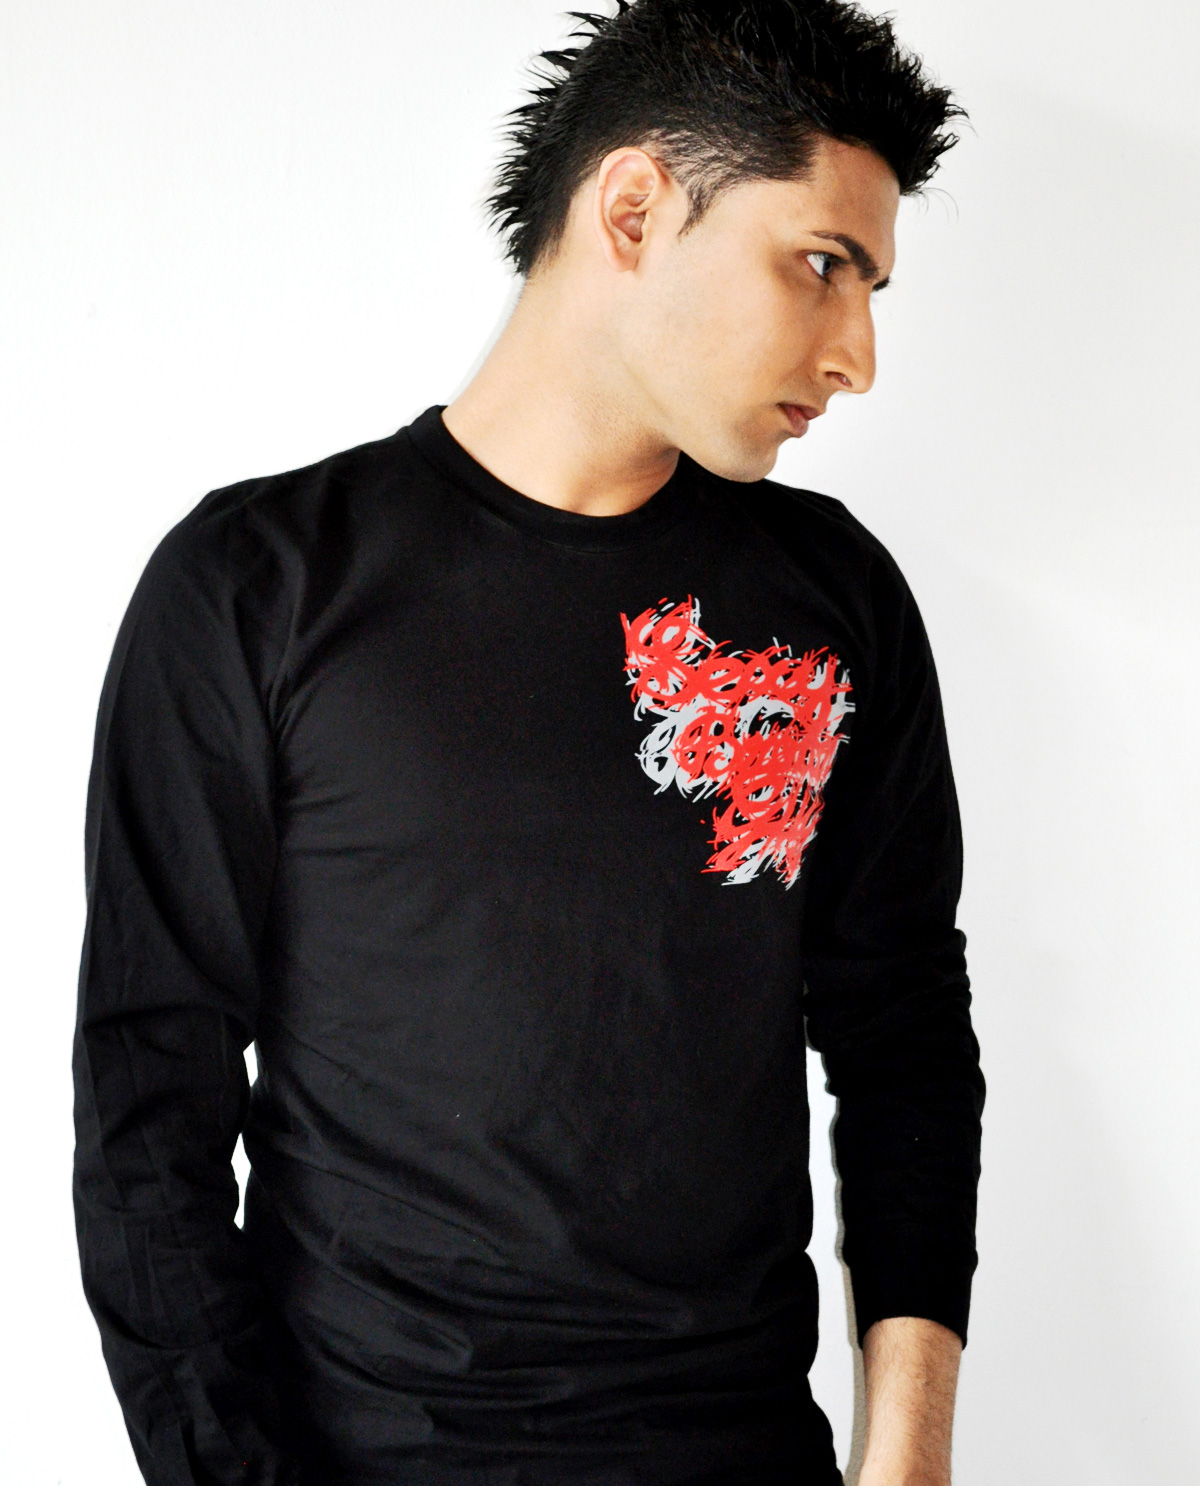 Sexy Brown Guy black long sleeved shirt. Graphic design t.shirts by Brown Man Clothing Co.